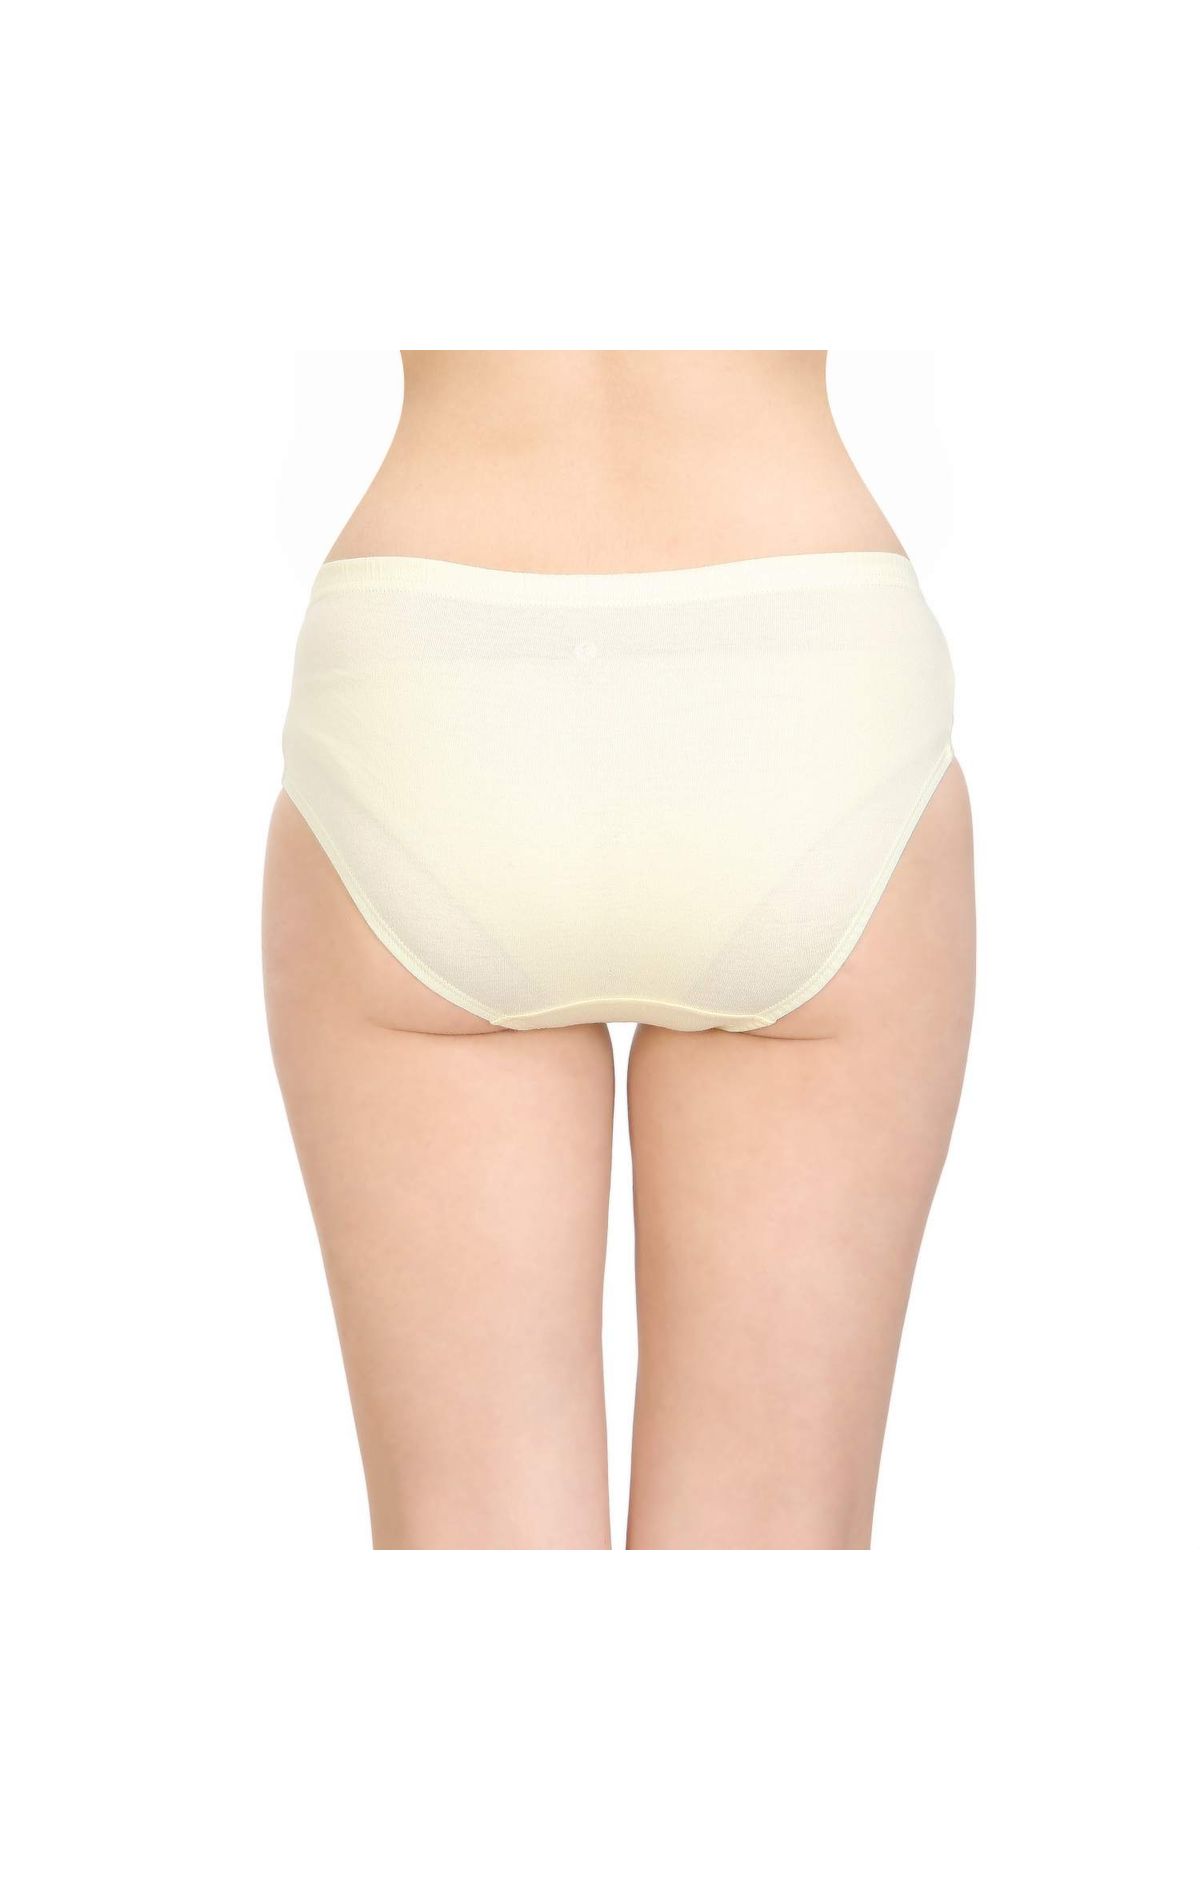 Buy BODYCARE Pack of 6 100% Cotton Classic Panties in E26C - Multi